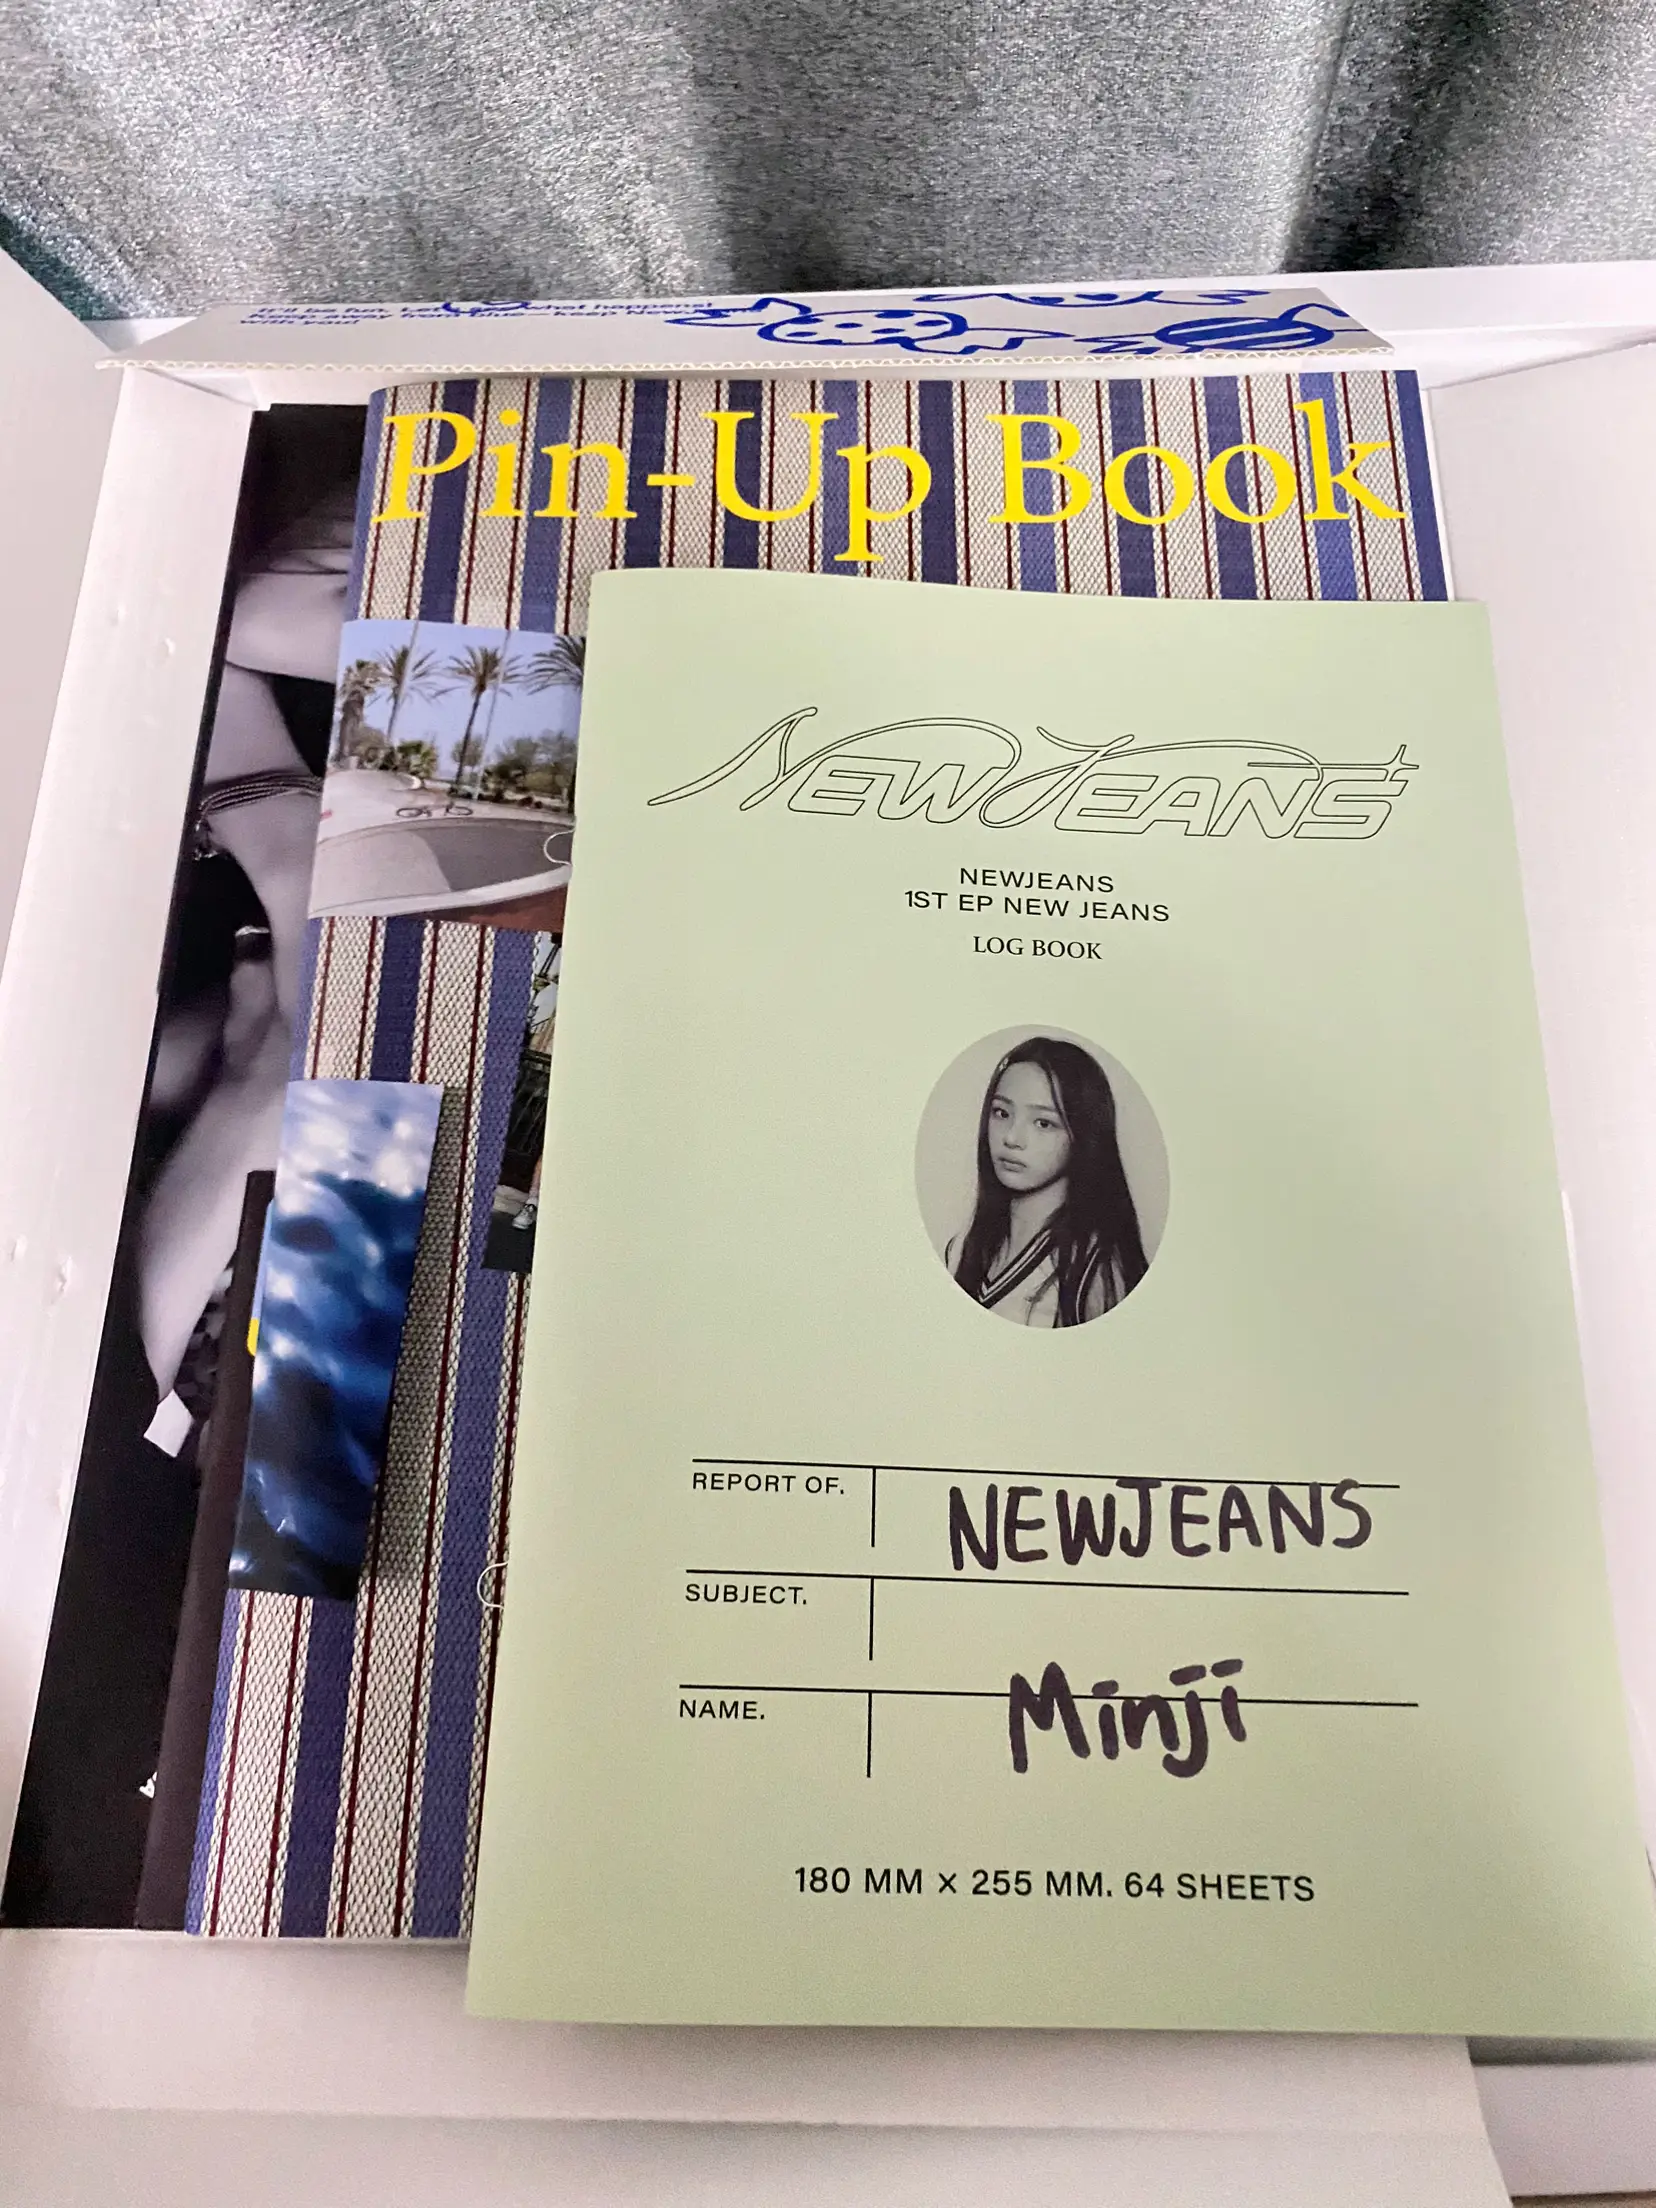 NewJeans- 1st EP 'New Jeans' [Bluebook Ver]